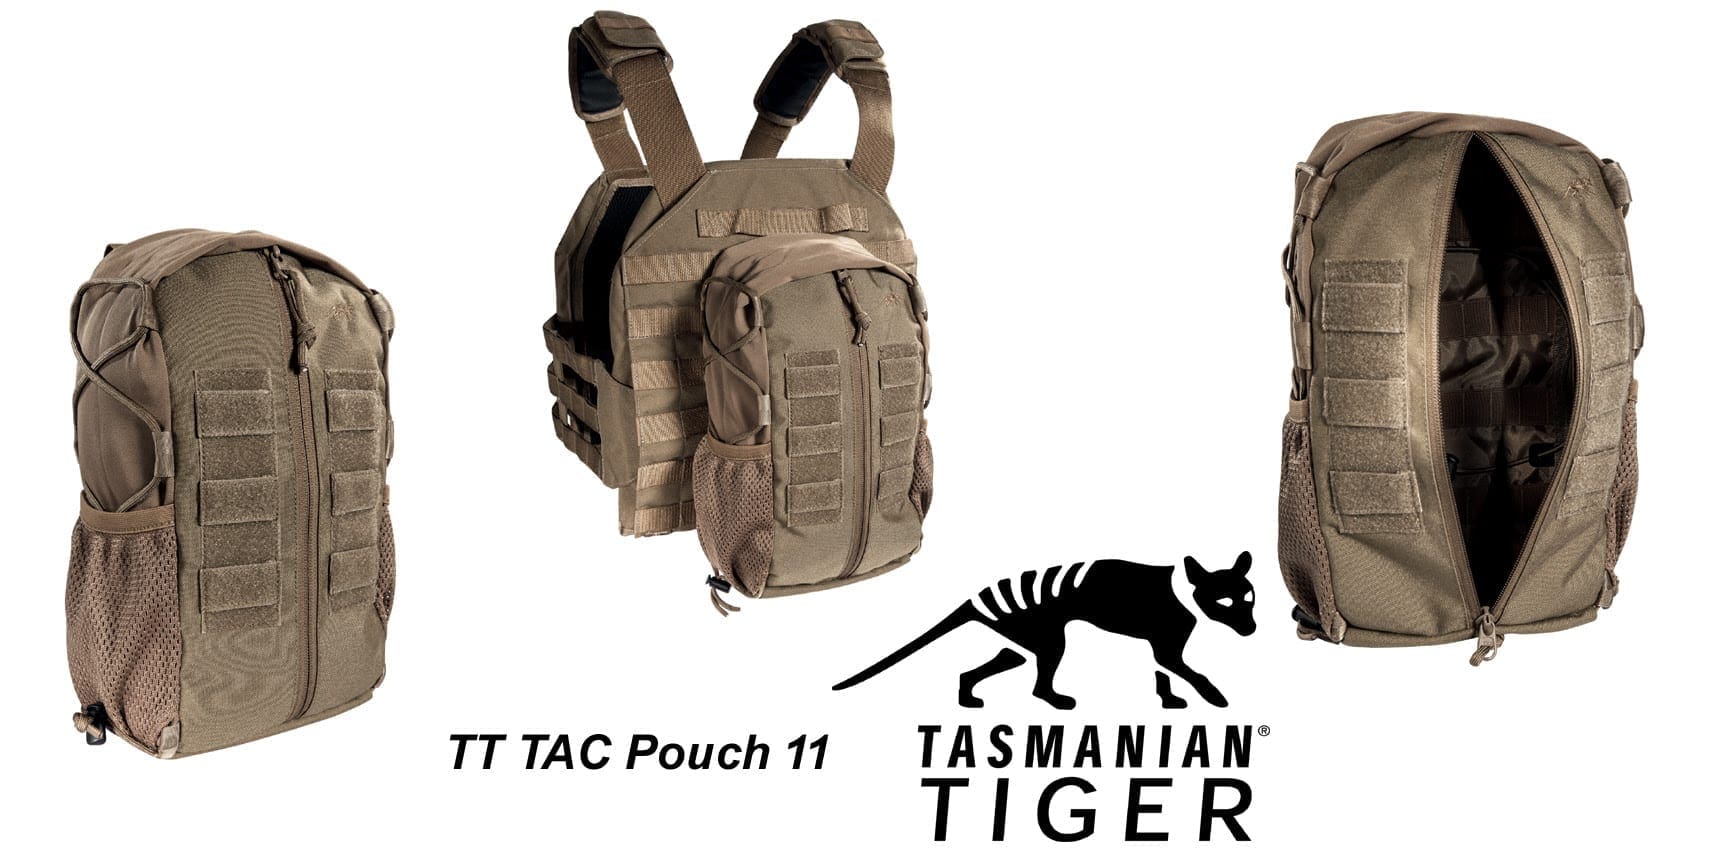 Accessorize with Tasmanian Tiger® Pouches